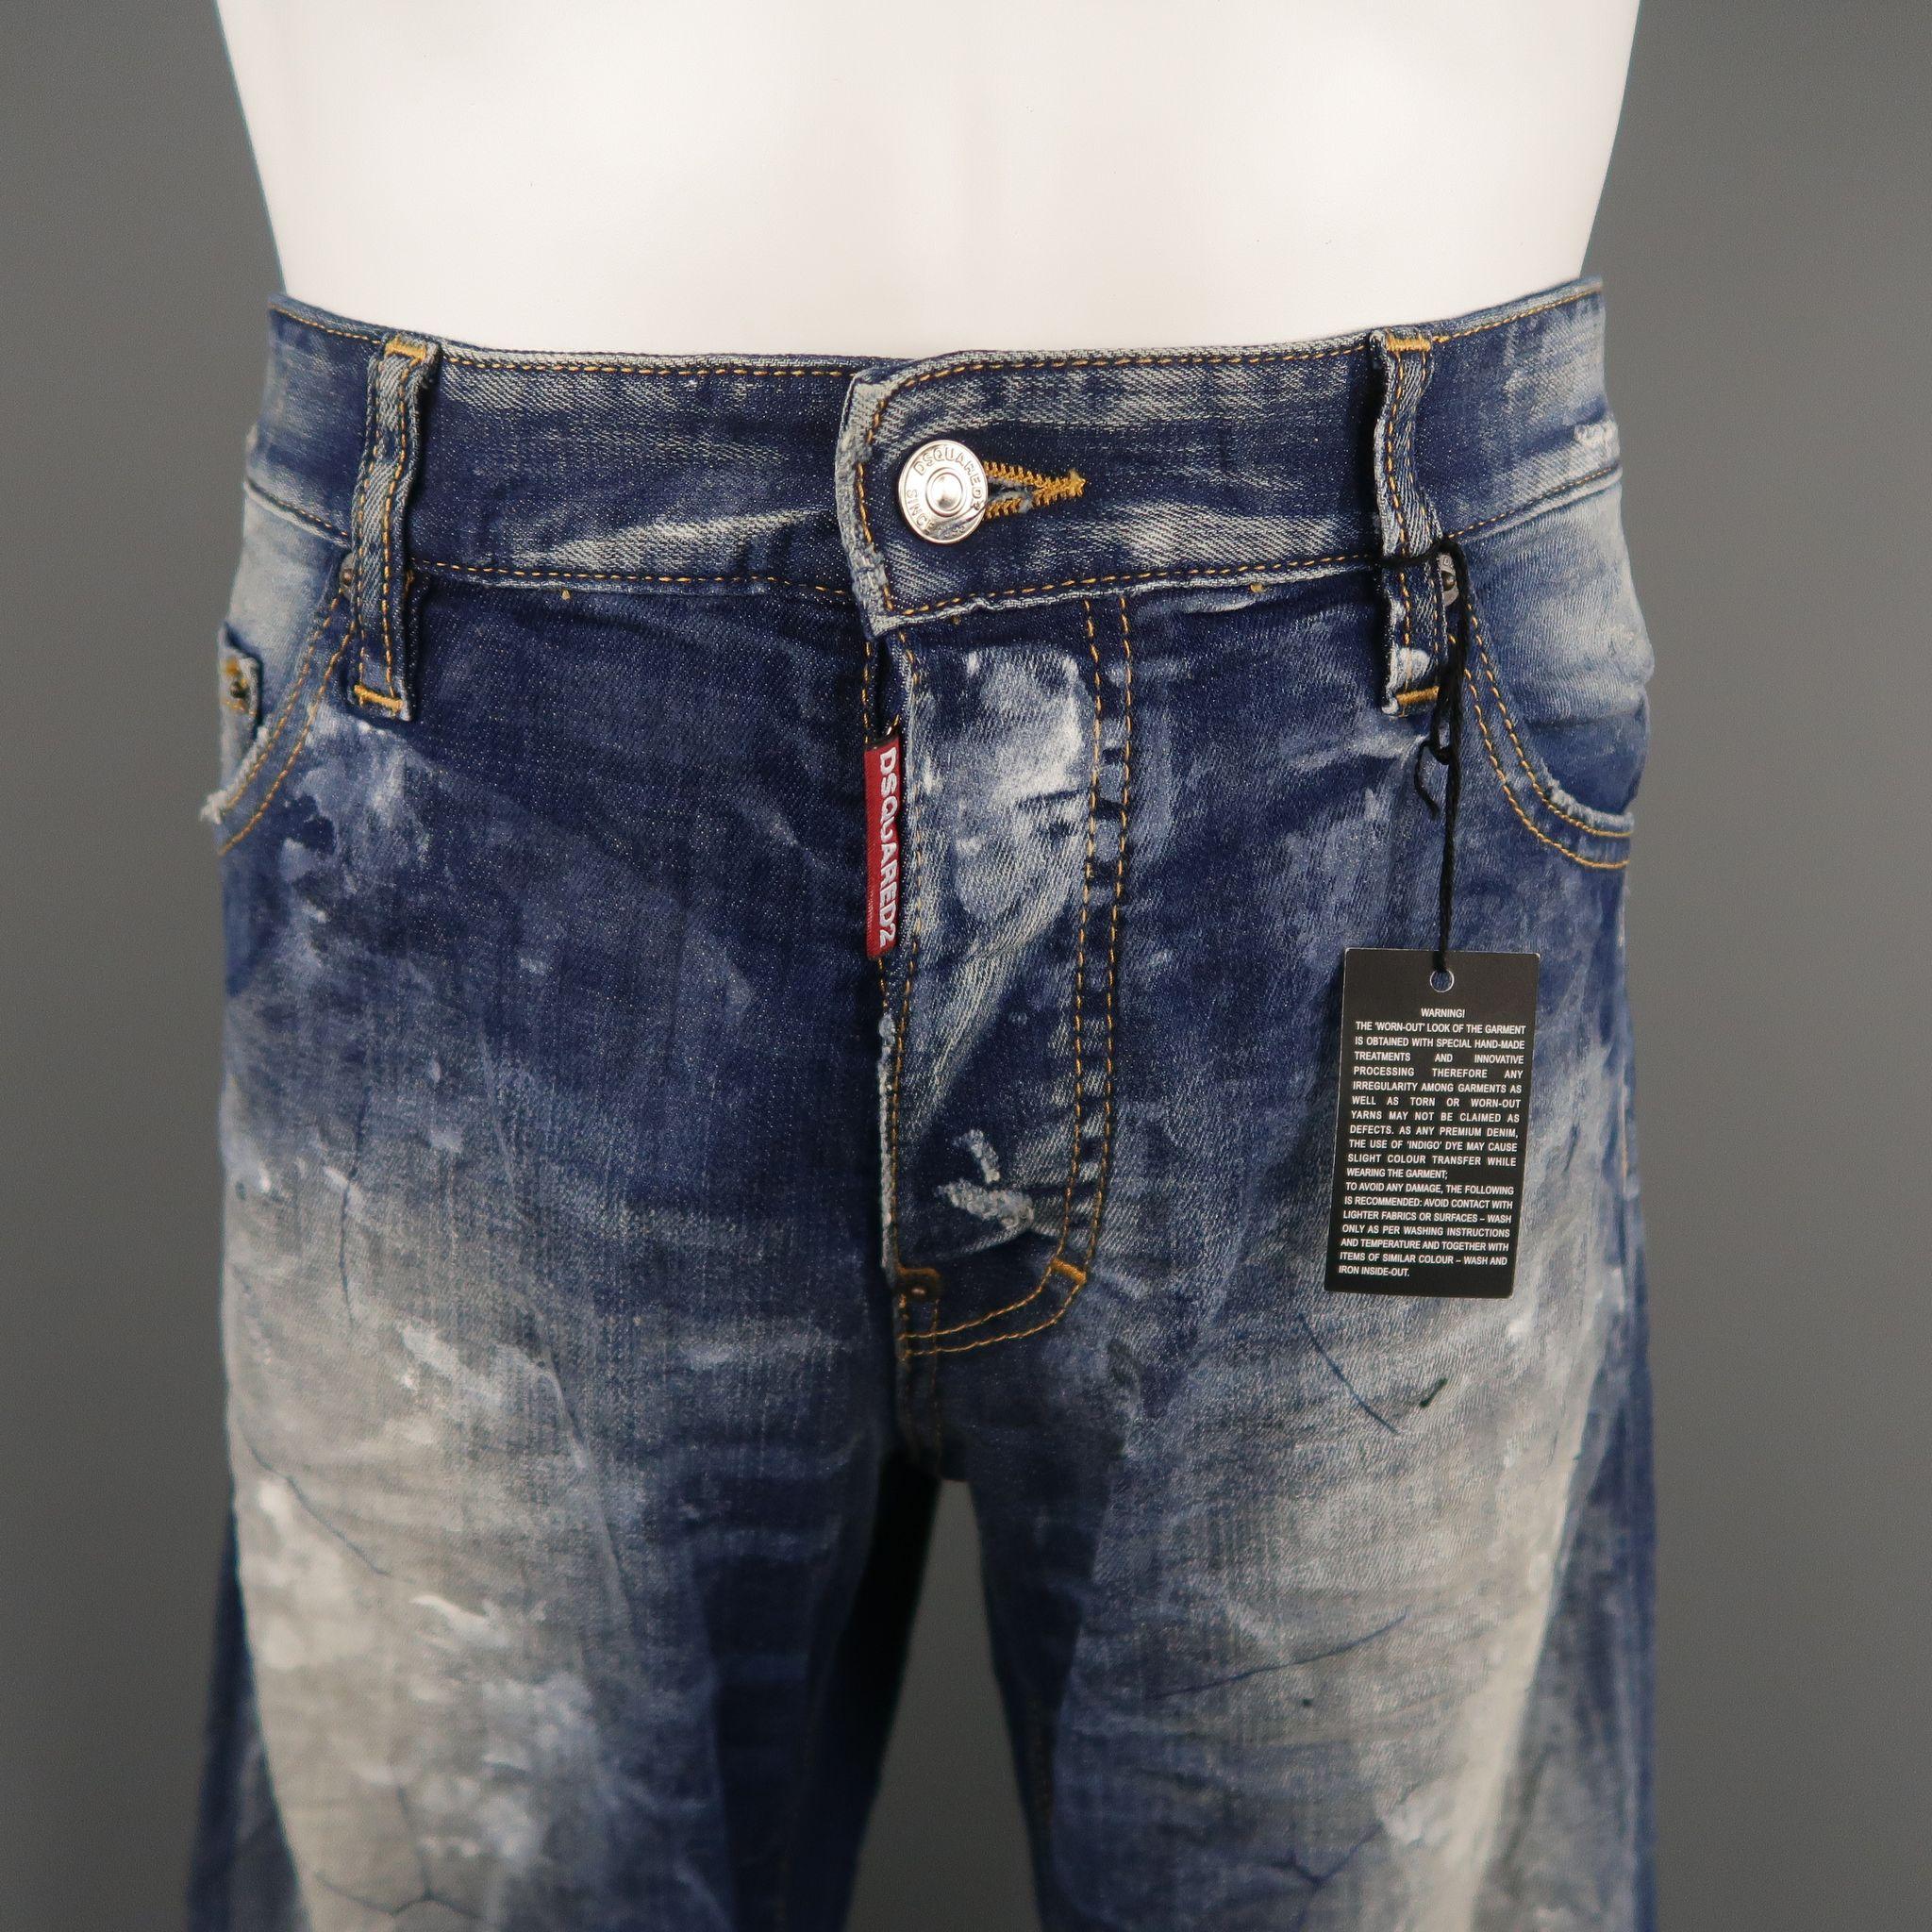 DSQUARED2 Jeans comes in an indigo tone in a denim material, with a painted effect throughout, stitched and button fly. Made in Italy.
 
New With Tags.
Marked: 50 IT
 
Measurements:
 
Waist: 37 in.
Rise: 10.5 in.
Inseam: 34.5 in.